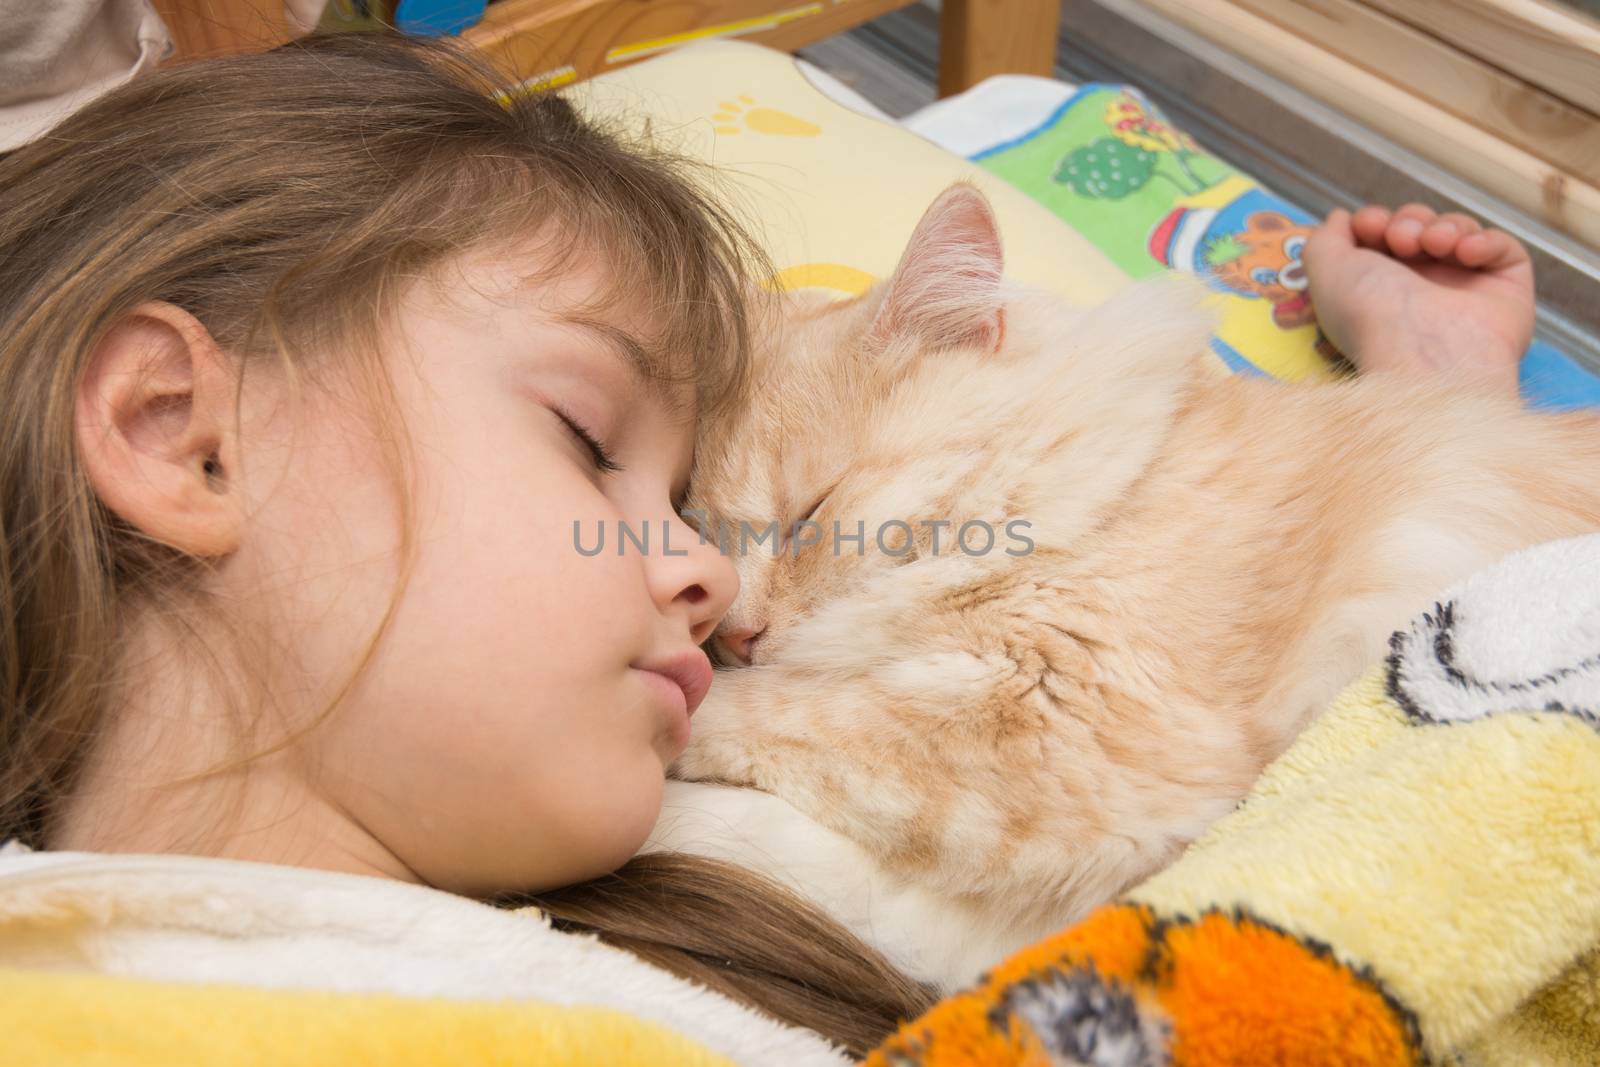 A girl and a cat are sleeping sweetly in bed, close-up